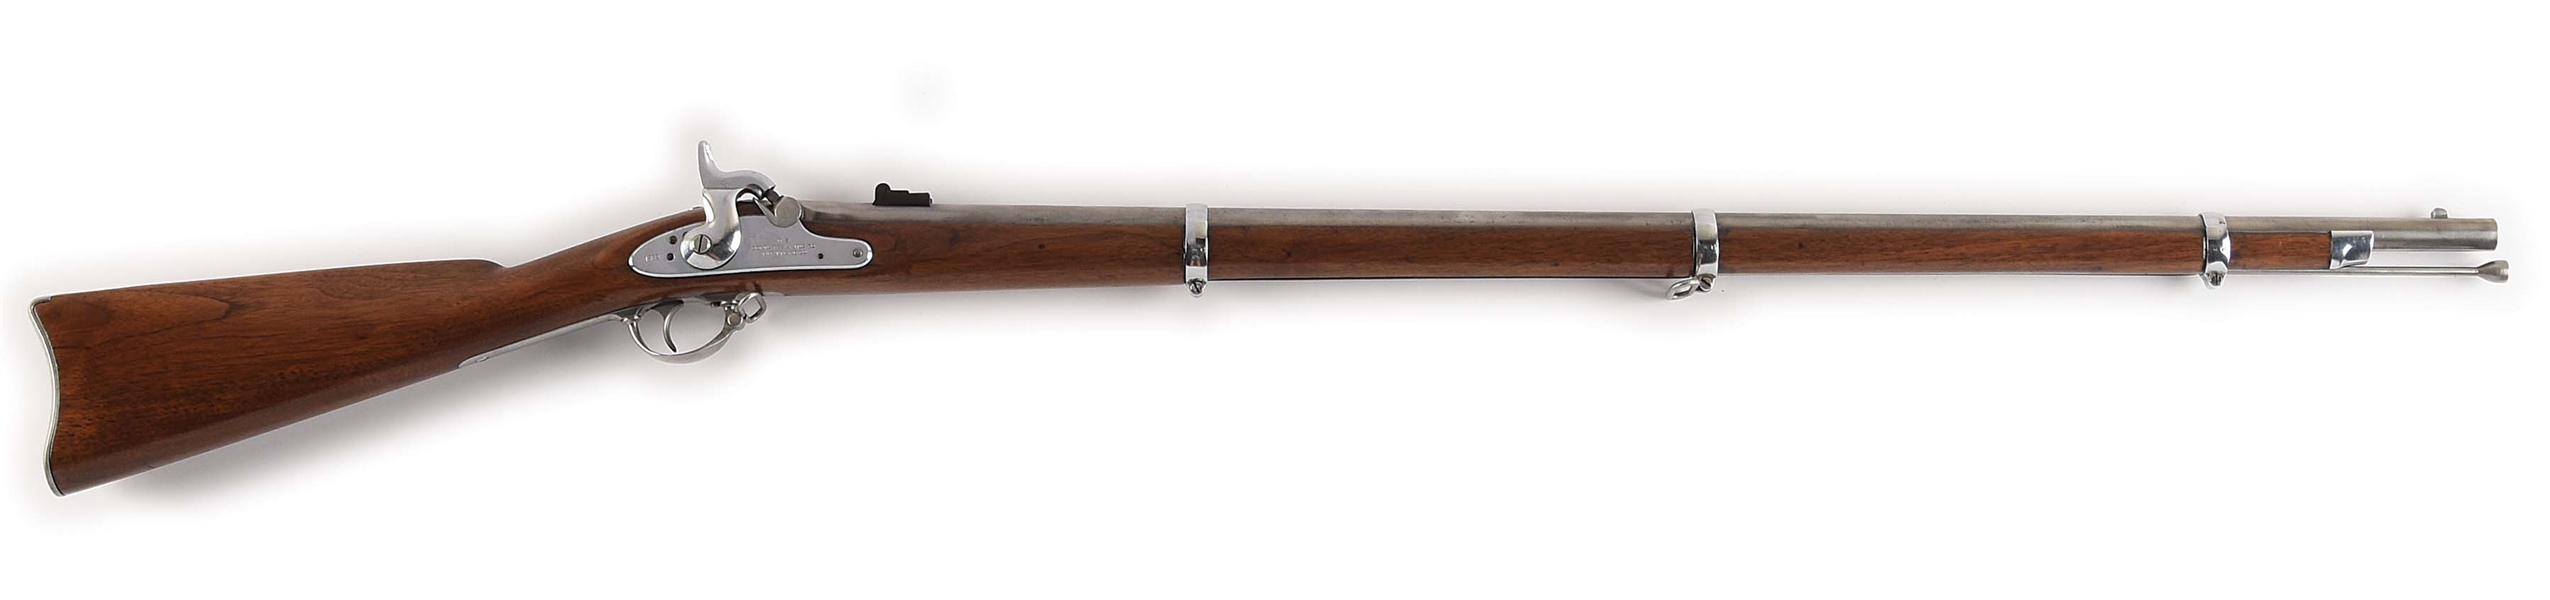 (A) COLT SPECIAL MODEL 1861 CIVIL WAR COMPOSITE RIFLED MUSKET DATED 1862.